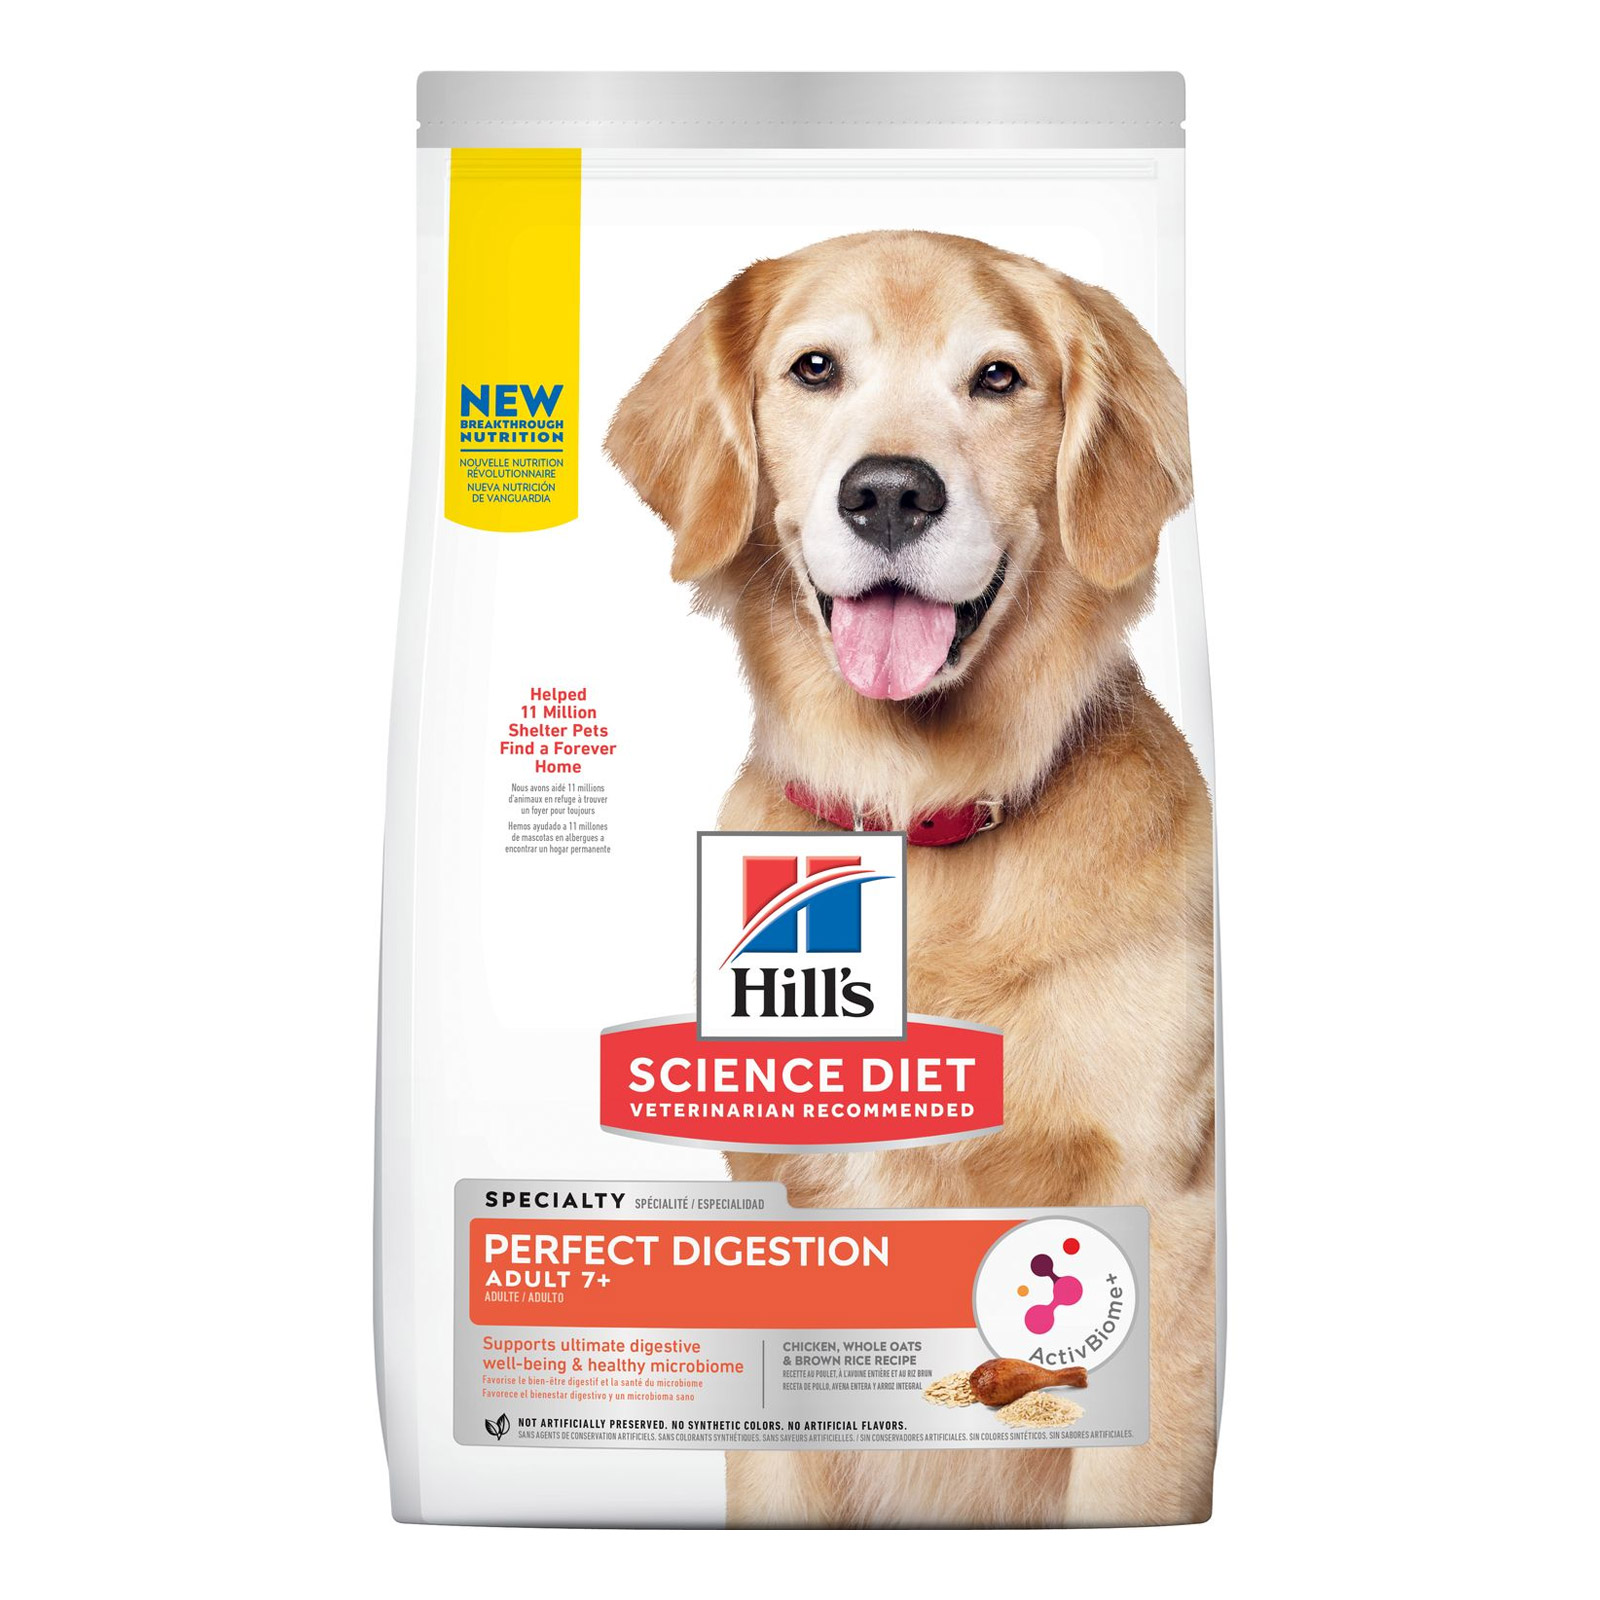 Hill’s Science Diet Adult 7+ Perfect Digestion Dog Food for Food